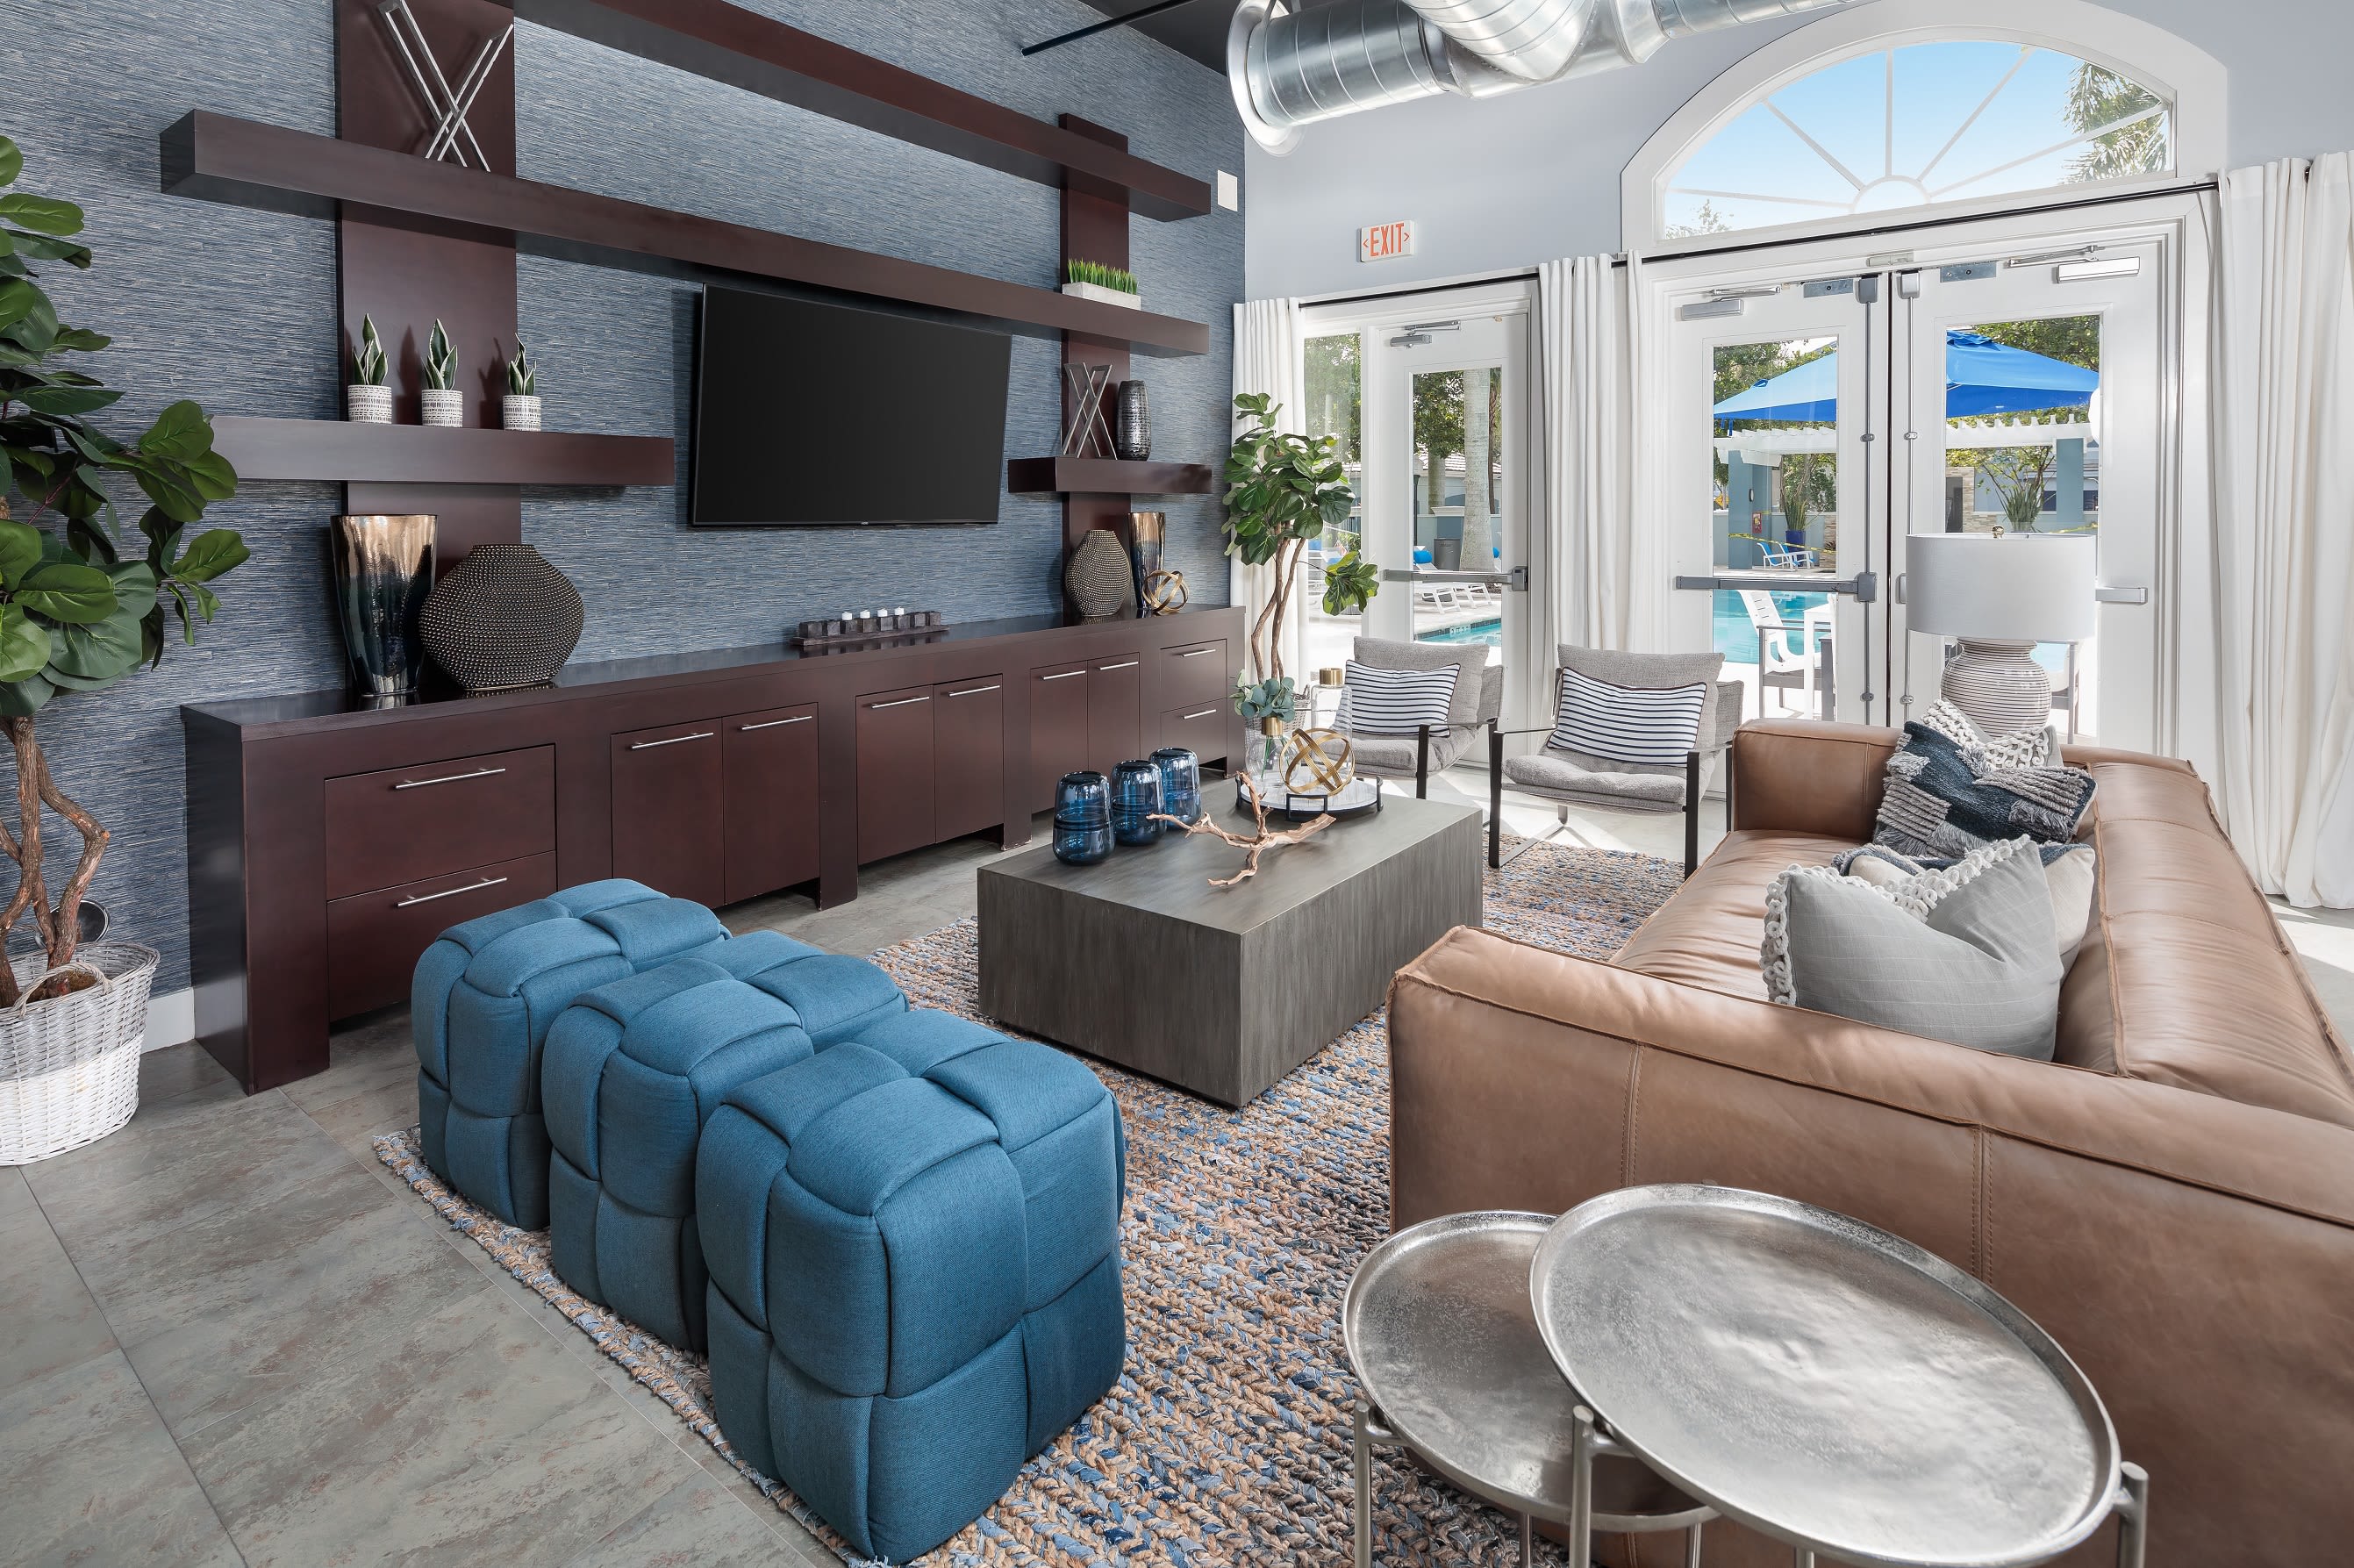 Clubhouse area for residents to hangout and play games with their friends at The Pearl in Ft Lauderdale, Florida